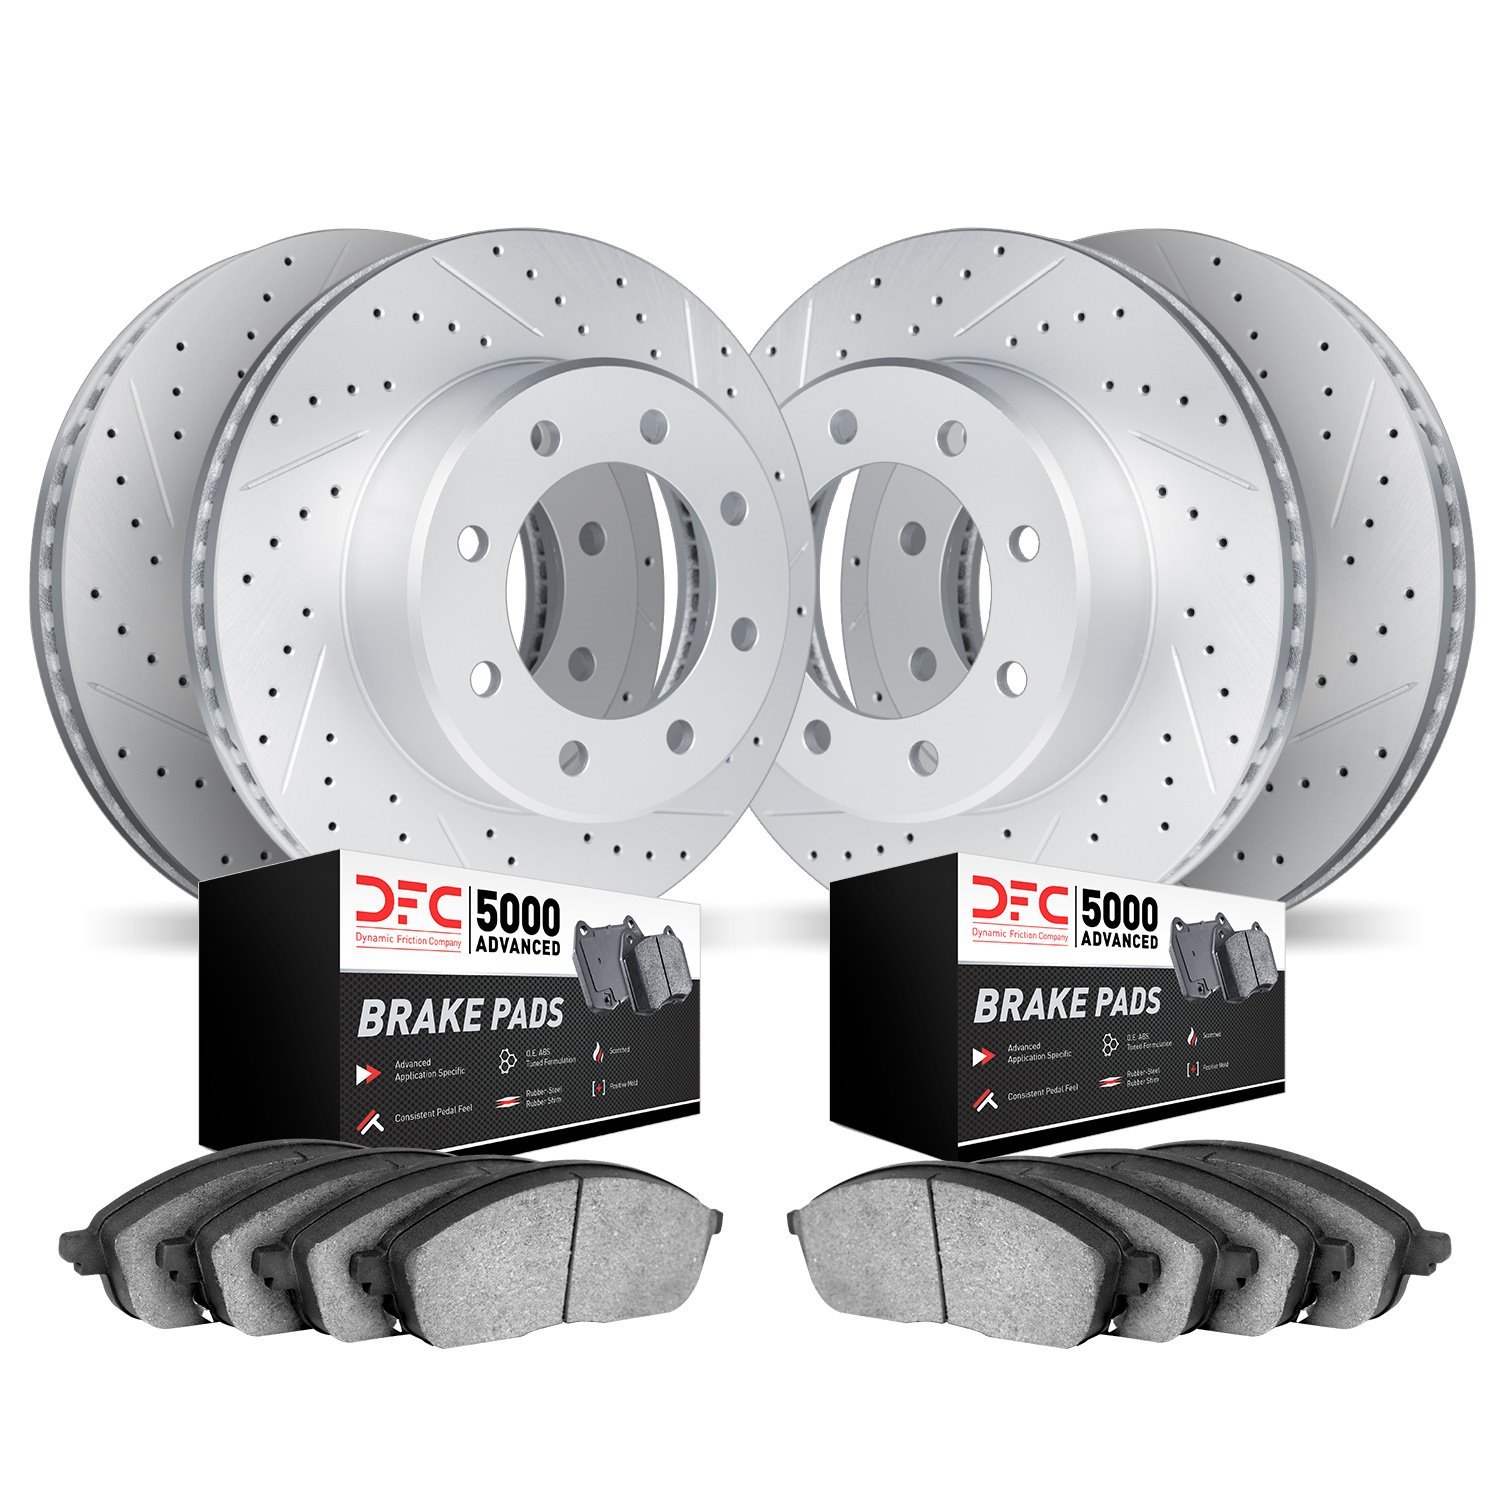 2504-40093 Geoperformance Drilled/Slotted Rotors w/5000 Advanced Brake Pads Kit, 2000-2002 Mopar, Position: Front and Rear